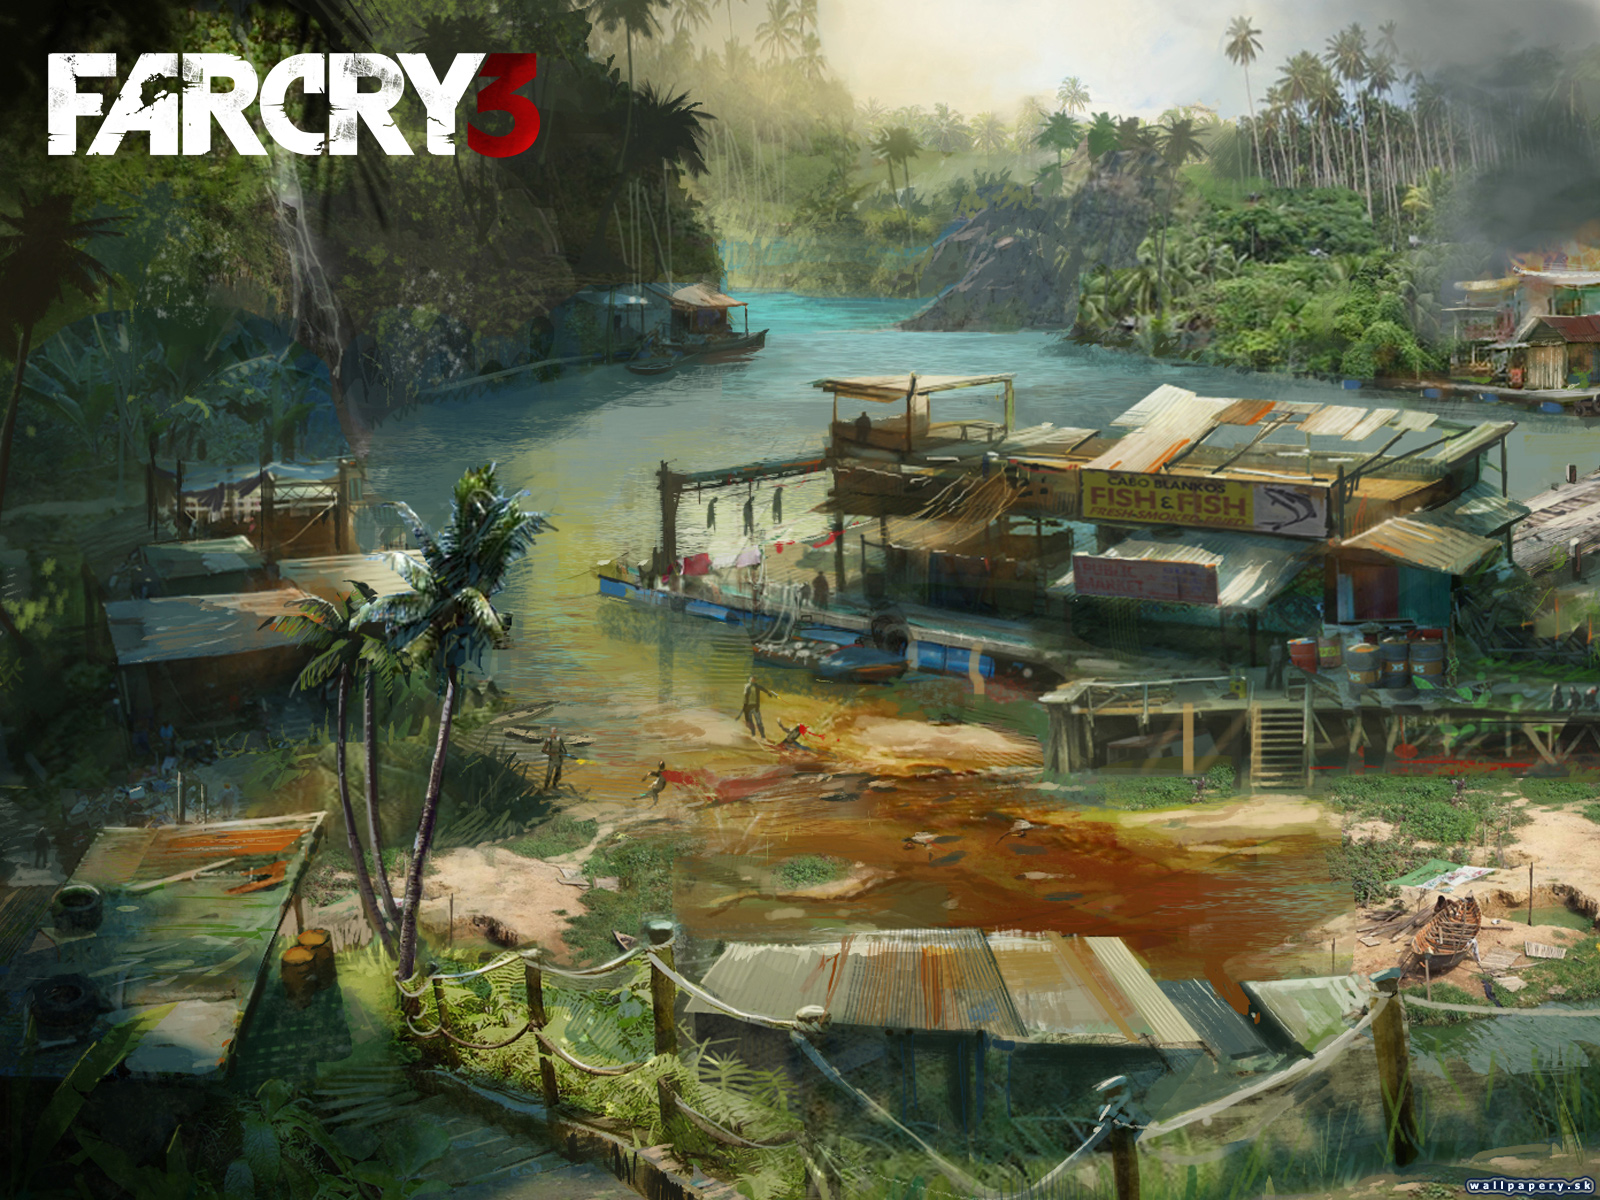 hd far cry 3 images